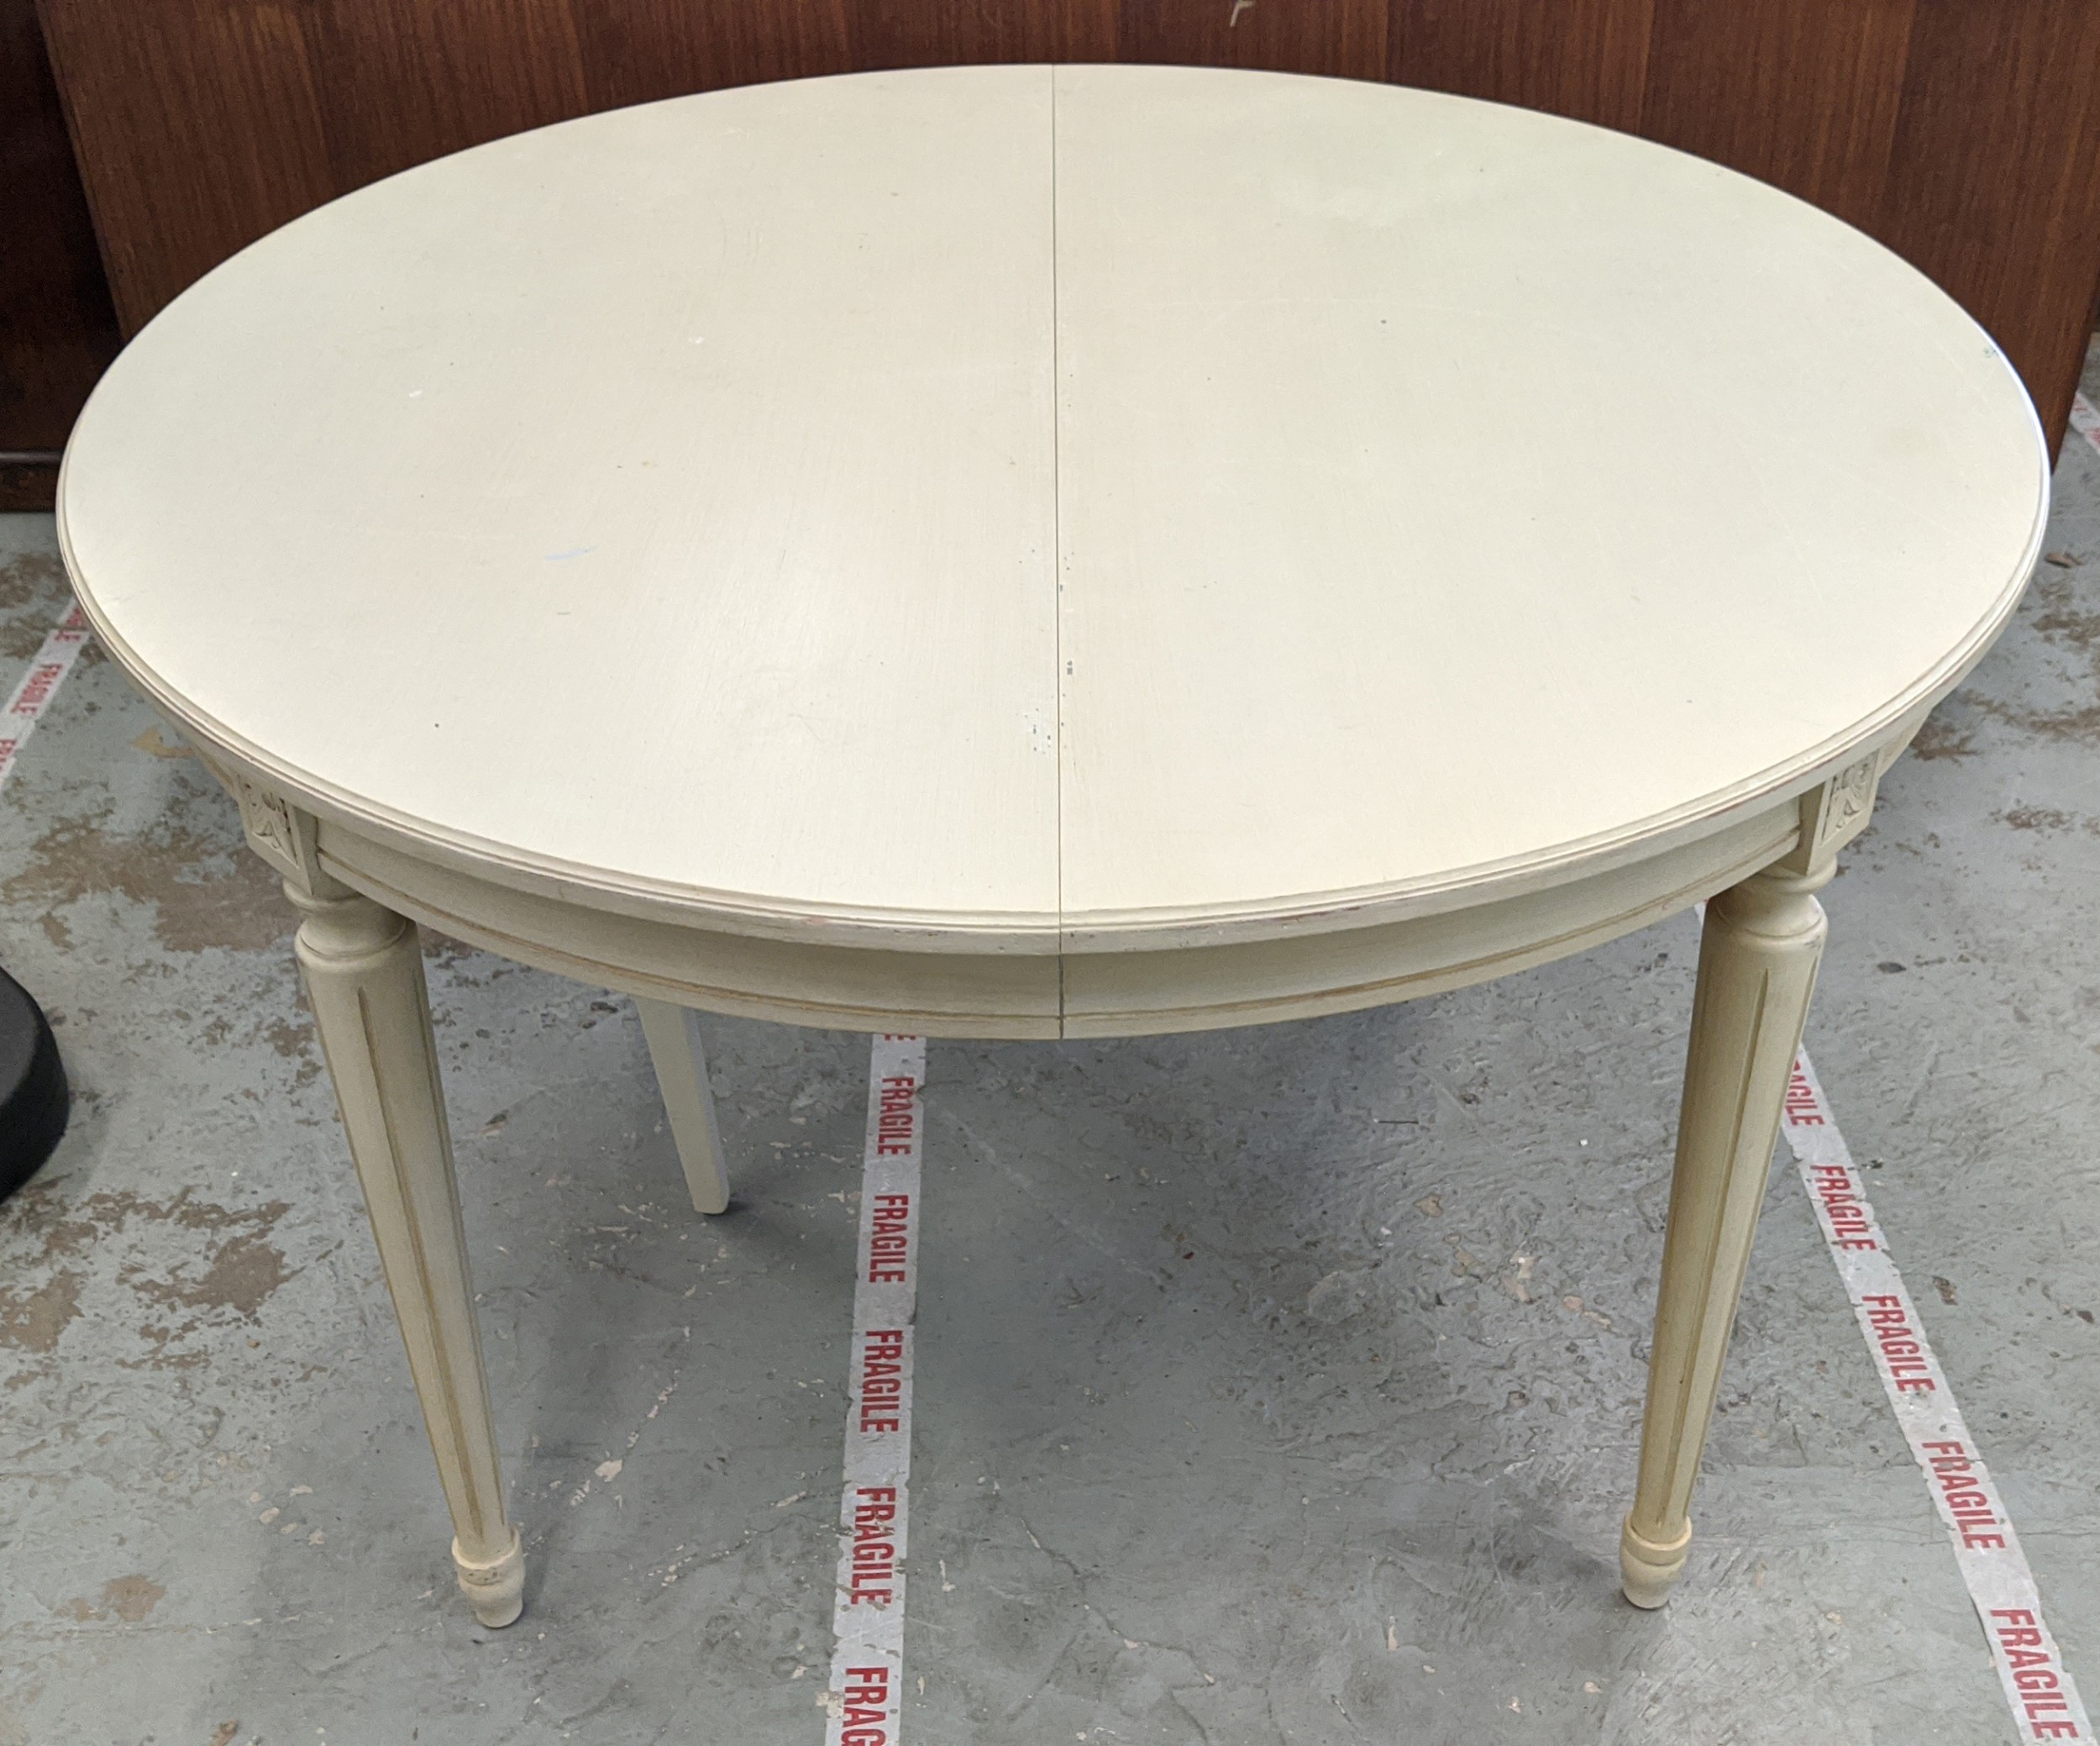 DINING TABLE, extendable in painted finish, with detachable fluted supports, 120cm D x 232cm L, - Image 9 of 9